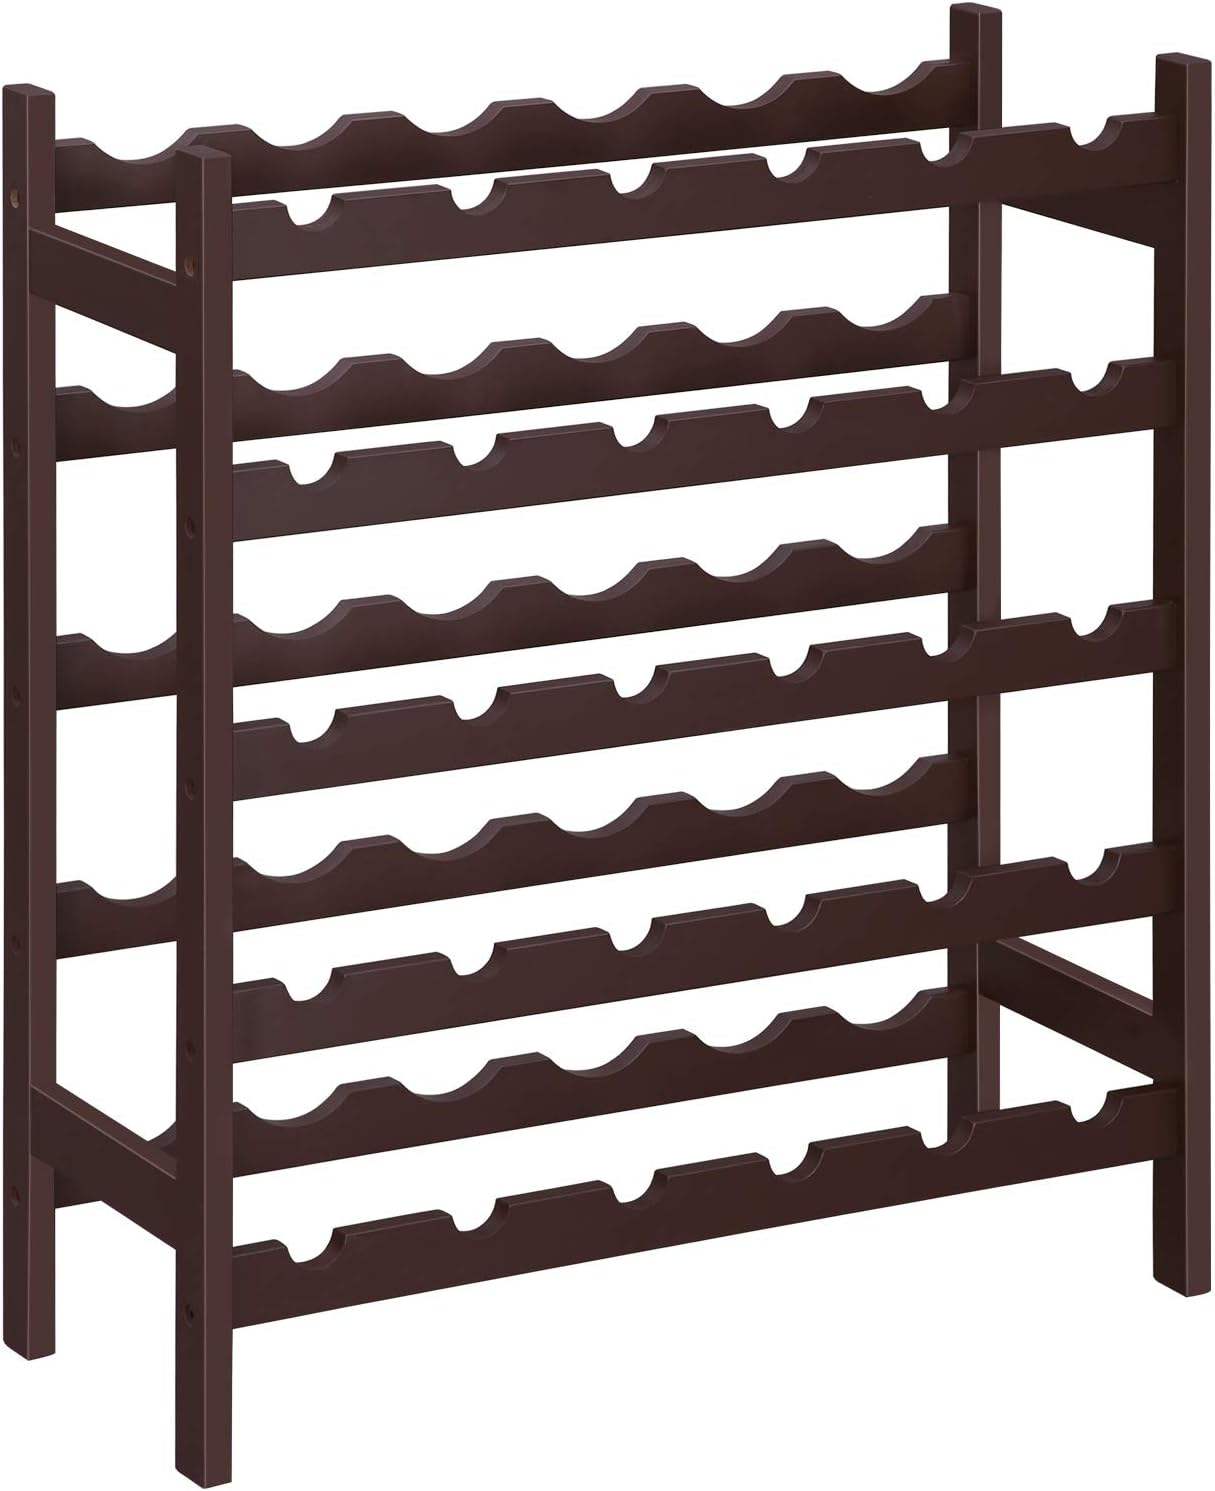 Minghou Introduces Custom Multi-Tier Wooden Wine Rack: Modern Design, Tailored to Your Needs